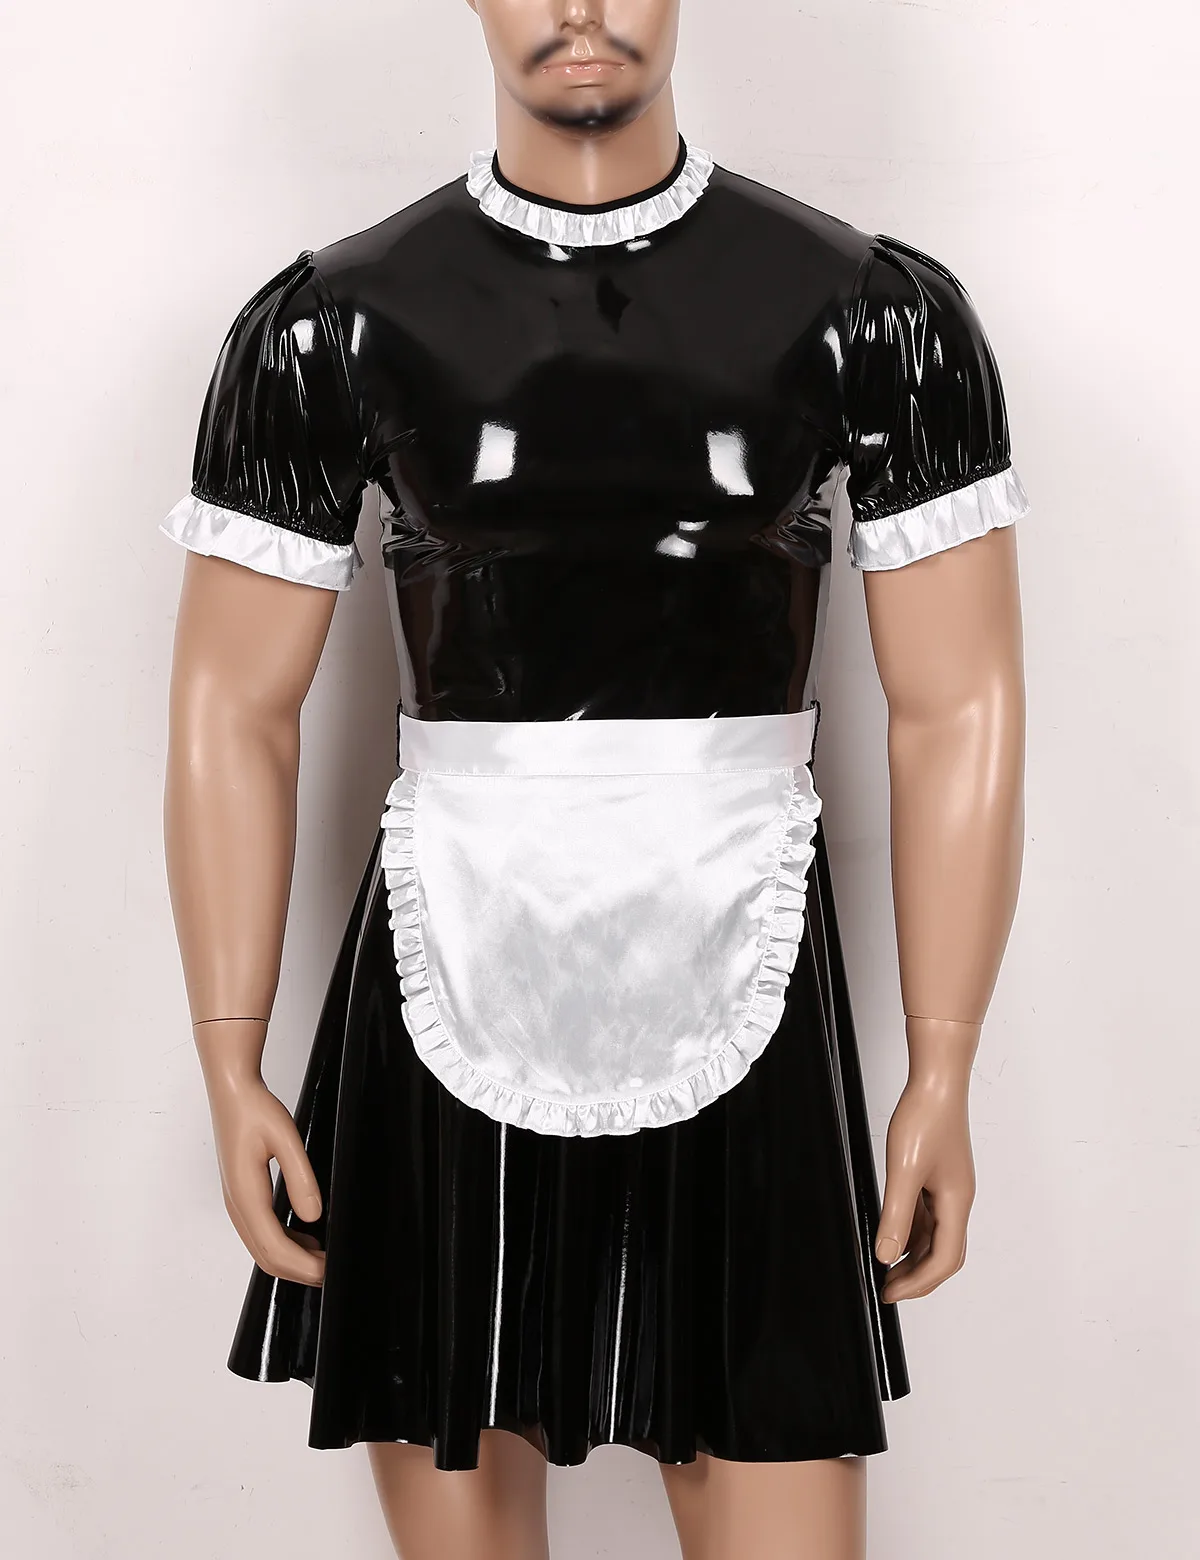 

Men Sissy Sexy Lingerie Maid Dress Cosplay Costumes PU Leather Crossdresser Gay Erotic Servant Uniform Role Play Dress and Apron